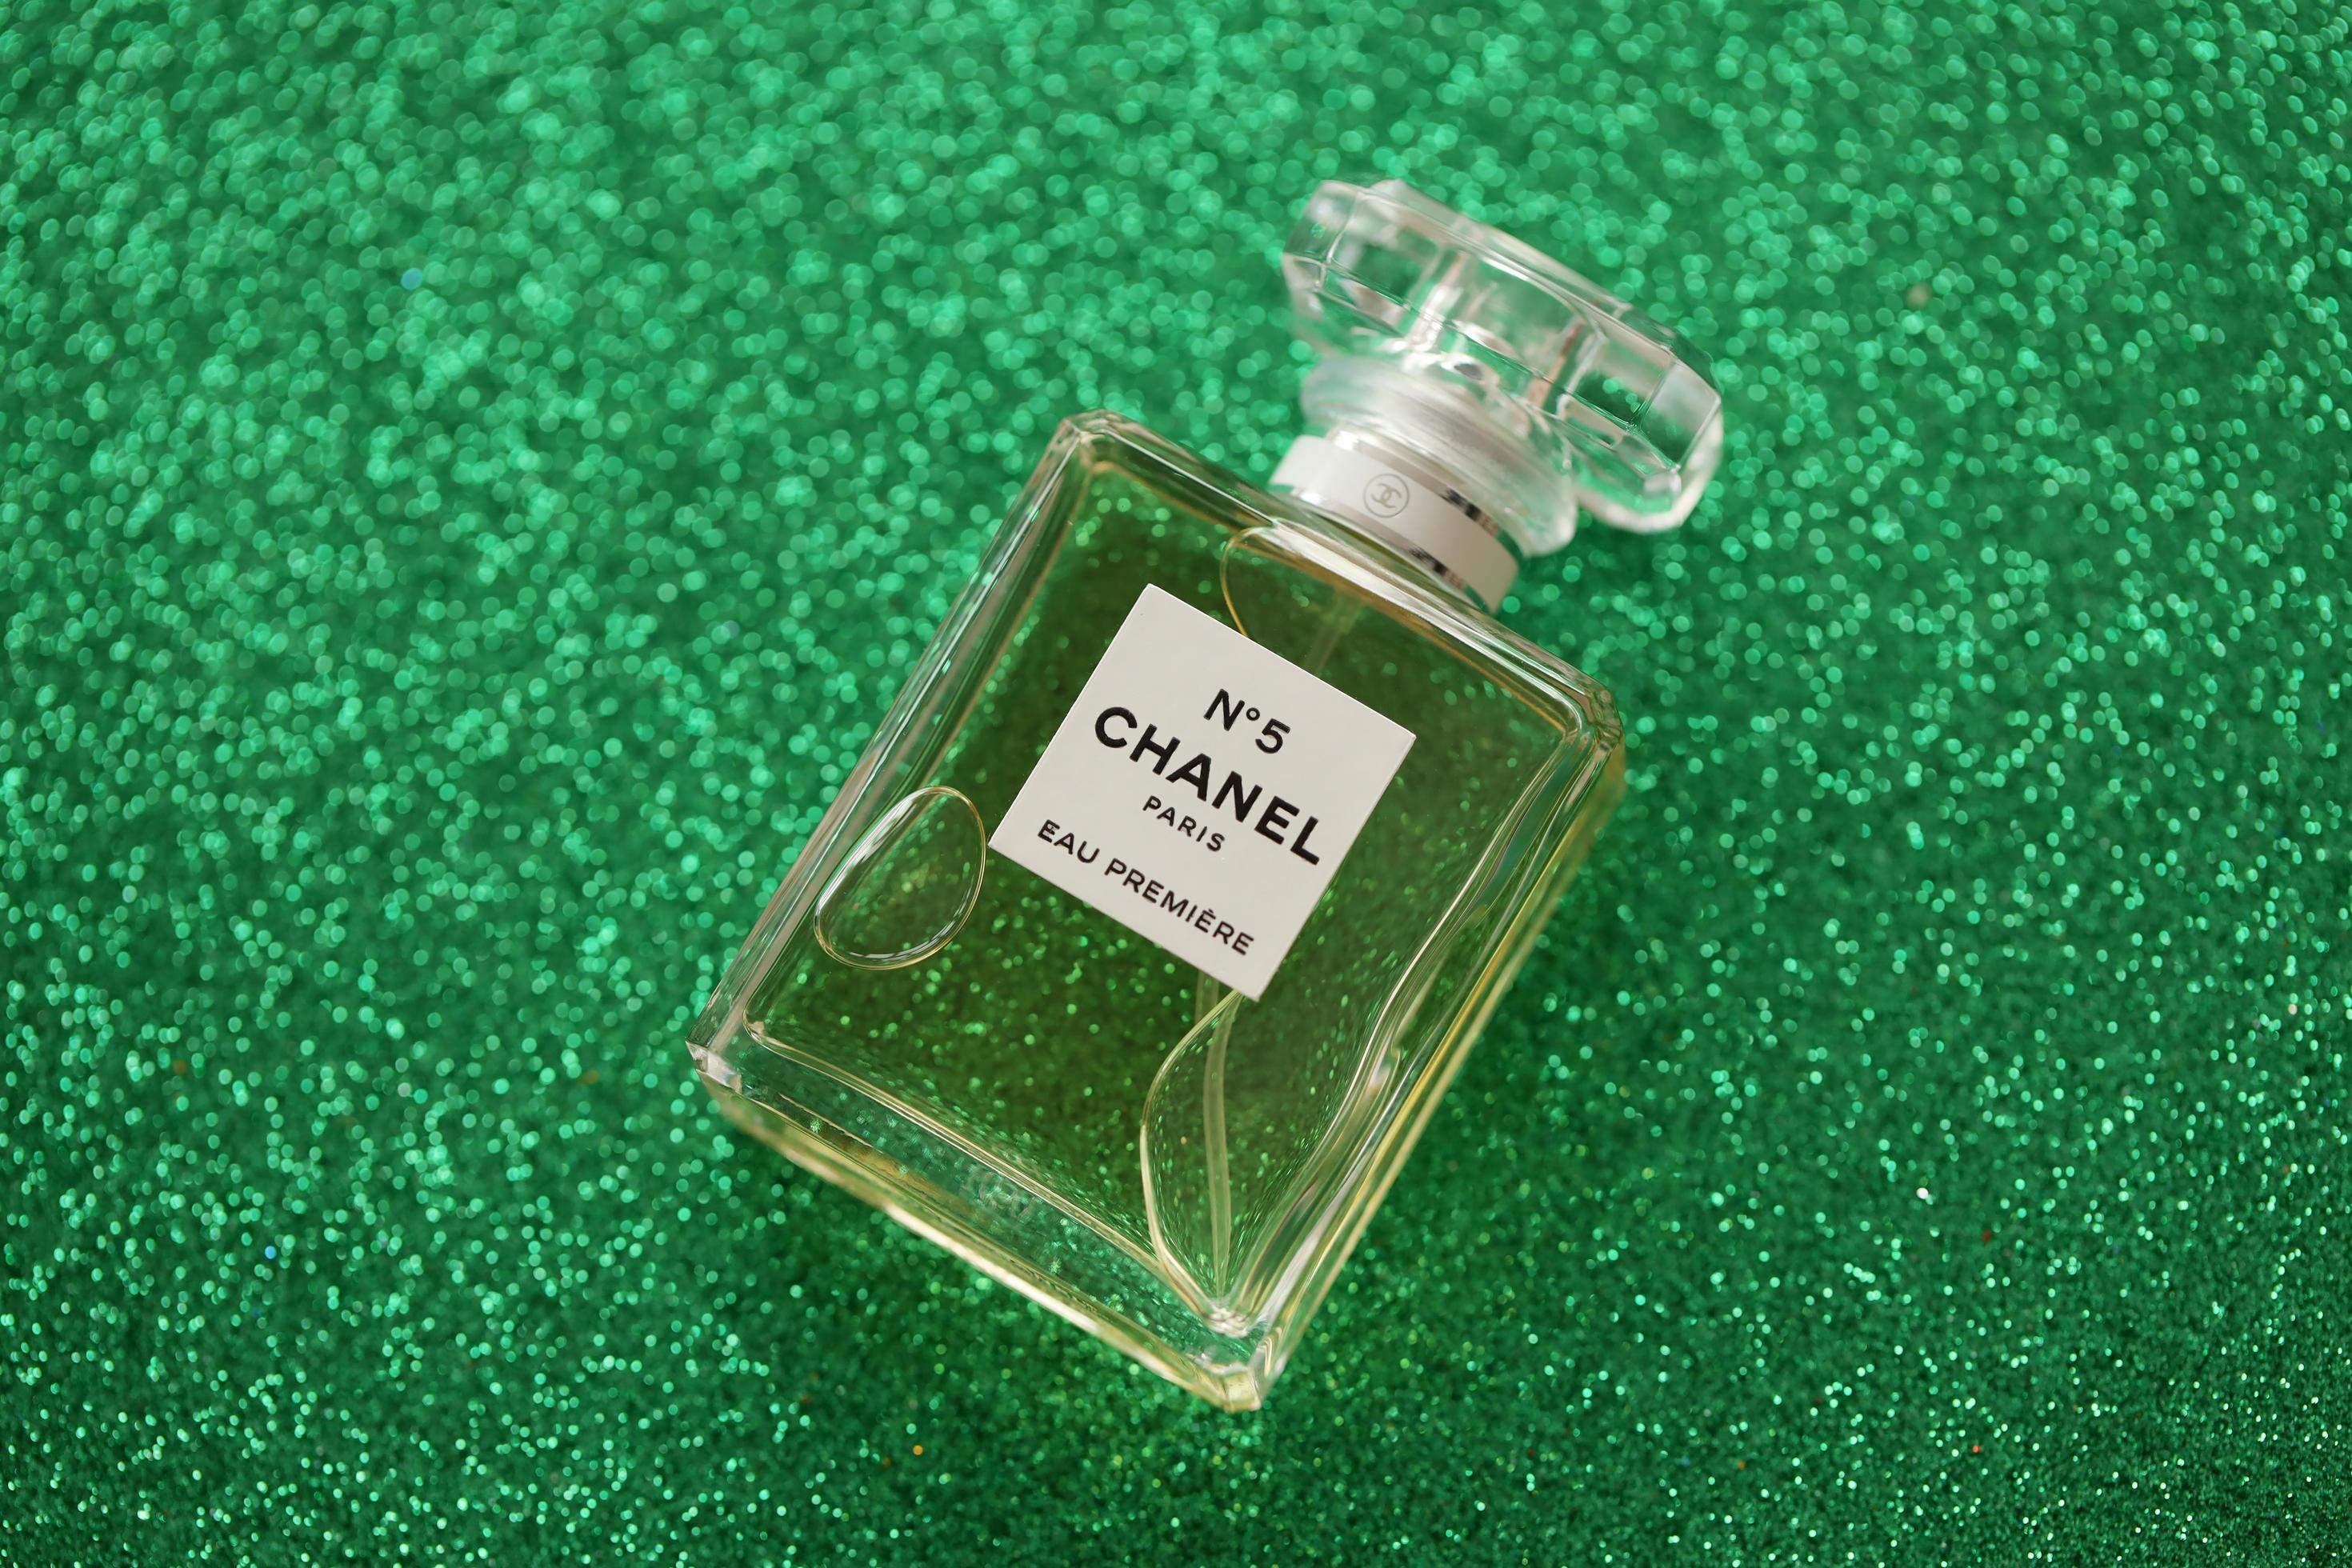 TERNOPIL, UKRAINE - SEPTEMBER 2, 2022 Chanel Number 5 Eau Premiere  worldwide famous french perfume bottle on shiny glitter background in green  colors 11838002 Stock Photo at Vecteezy